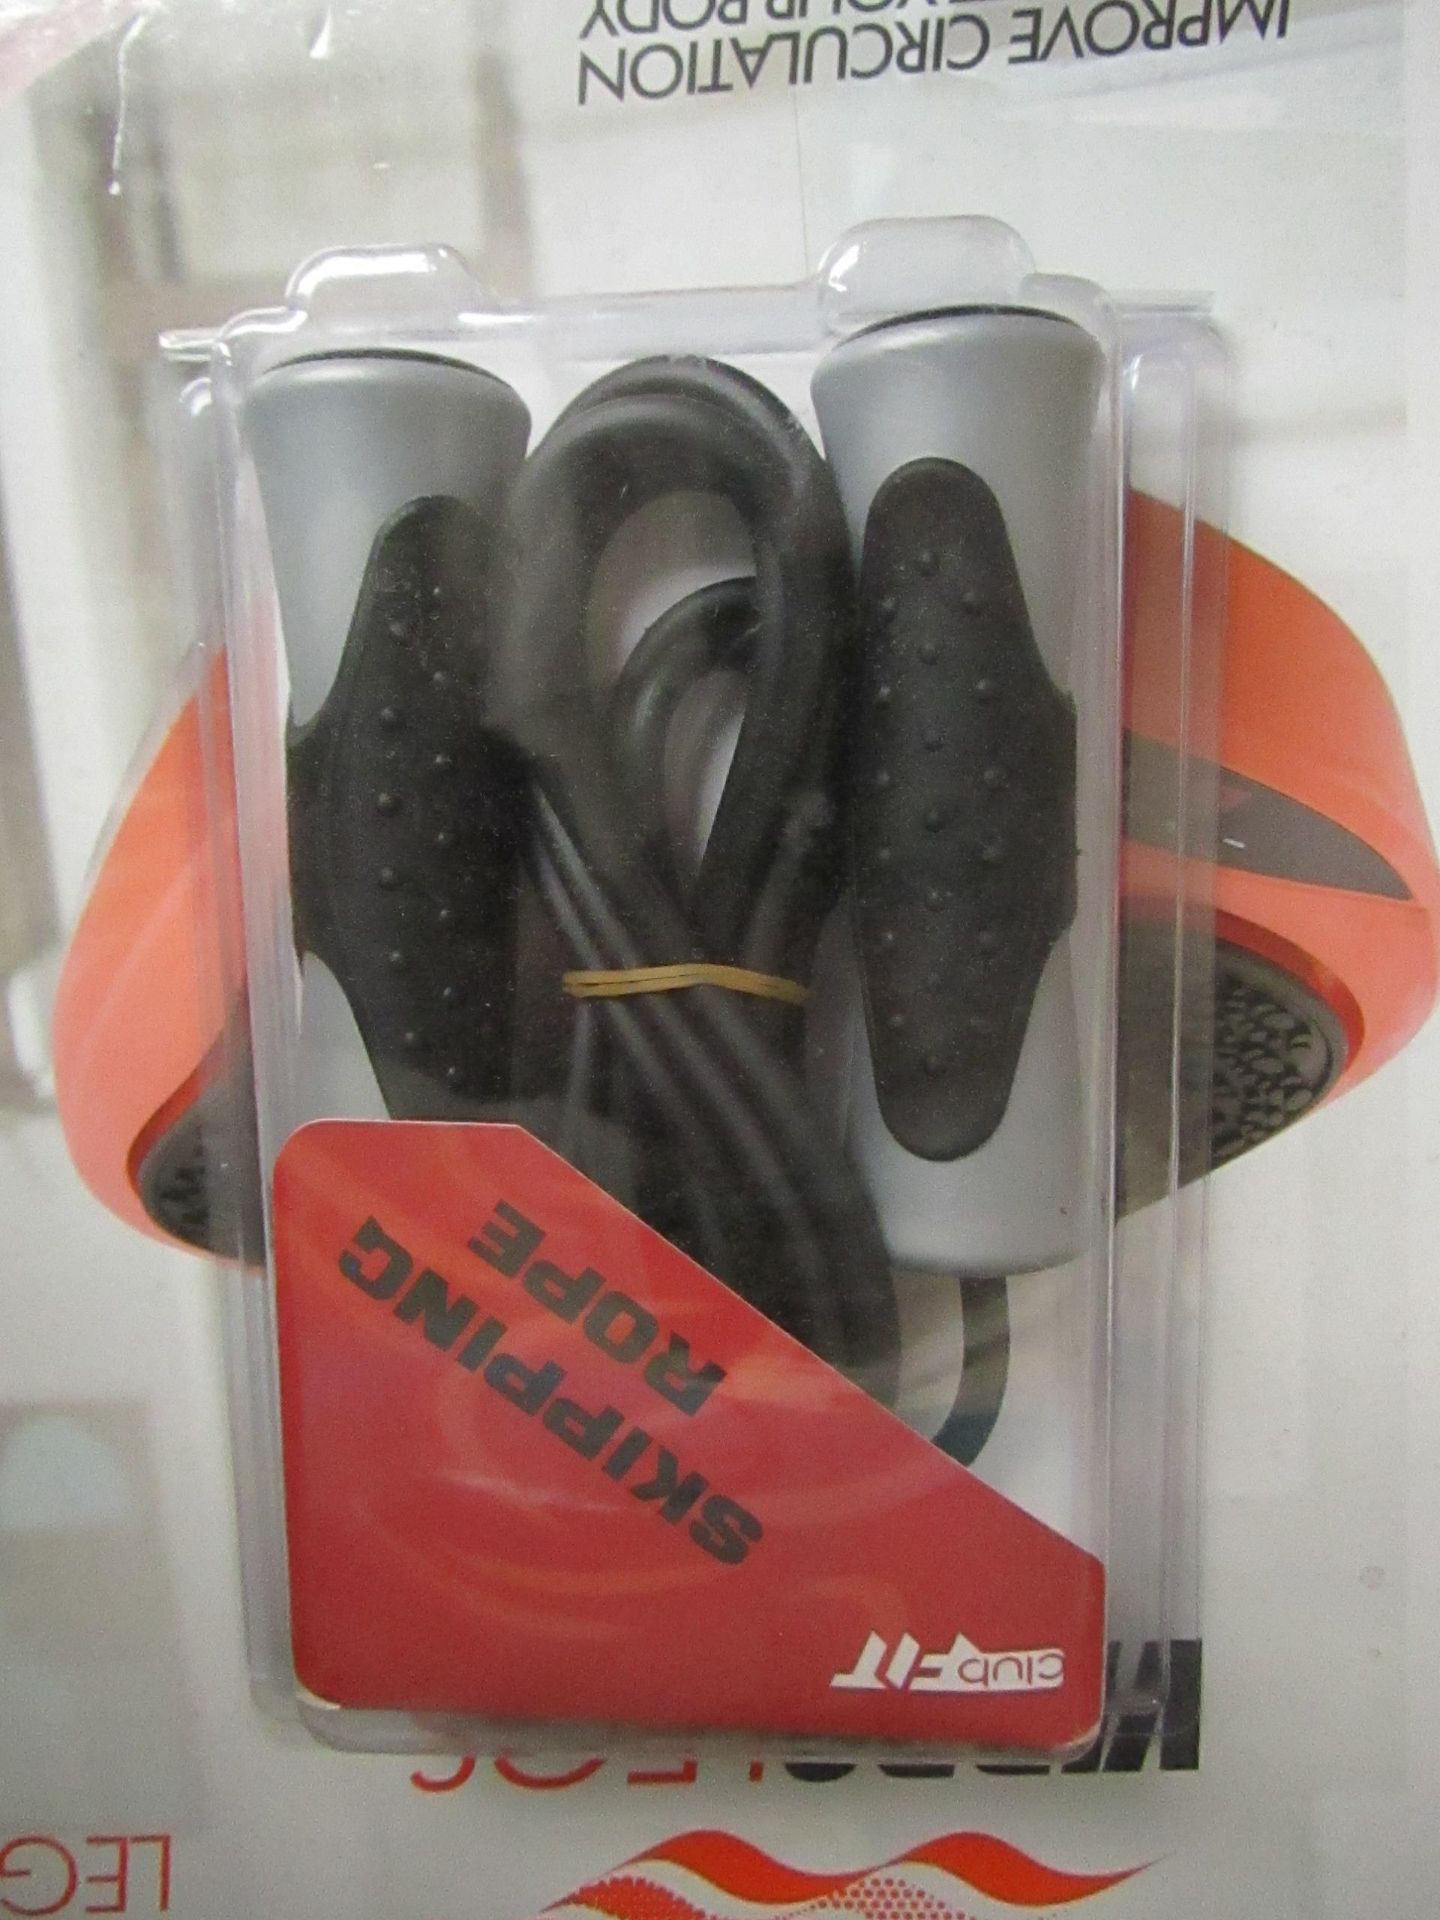 ClubFit - Skipping Rope - New & Packaged.